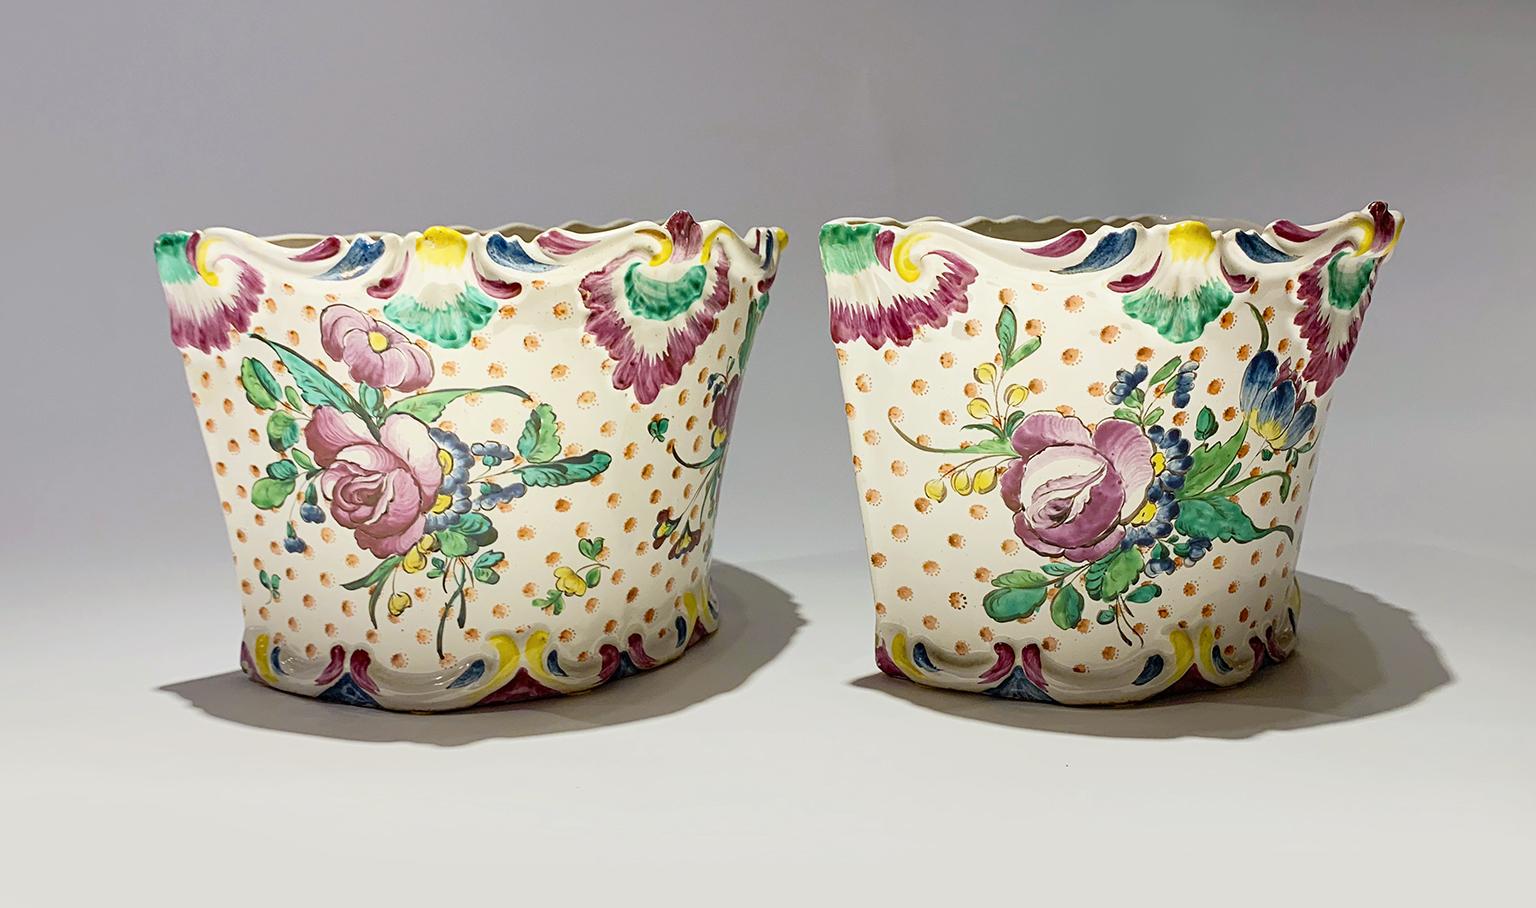 Maiolica flower pot “a mezzaluna” 
Pasquale Rubati Factory
Milan, 1770 Circa
They measure: height 6.2 in x 8.66 x 5.31 (15,8 cm x 22 x 13,5)
Weight: 1.86 lb (847 g) and 1.94 lb (881 g)
State of conservation: intact with slight chips.

A rare example